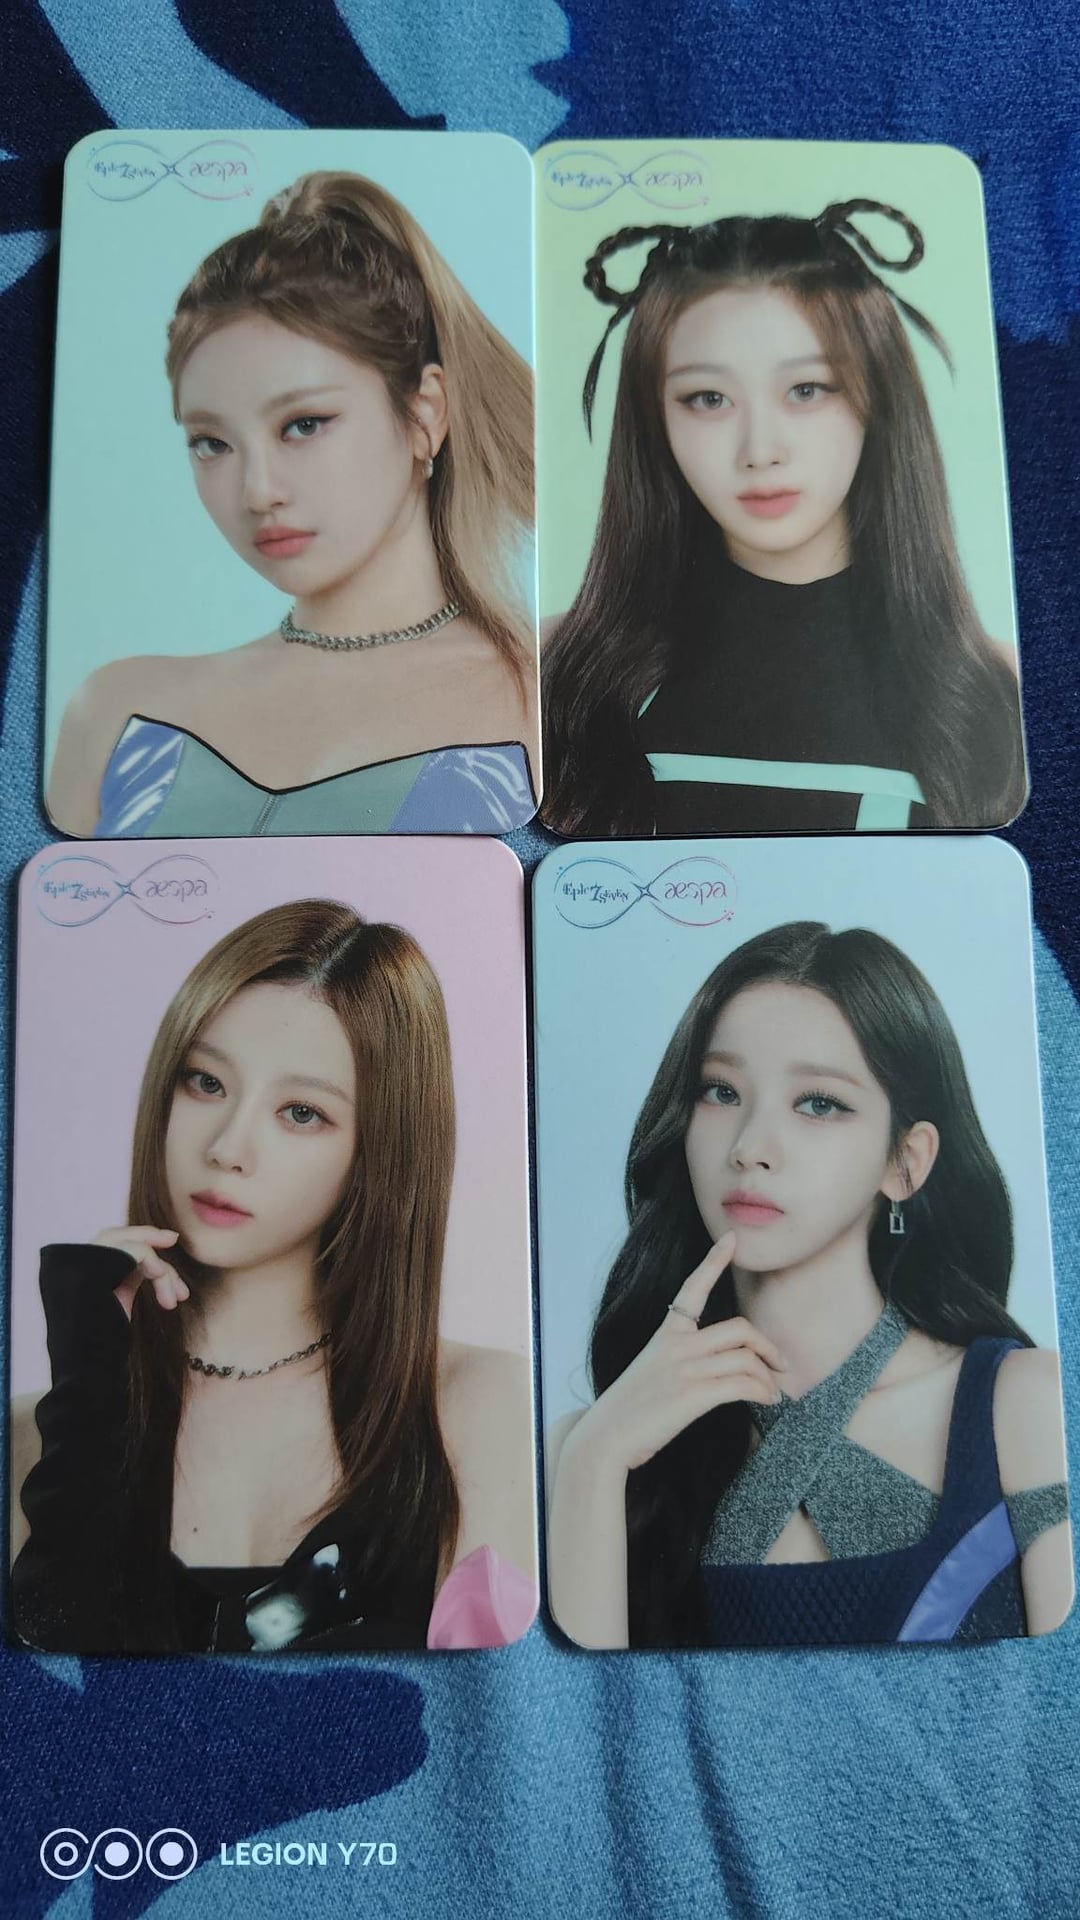 Event reward from epic 7 ❤️❤️❤️ front and back of the photocards from the collab with aespa